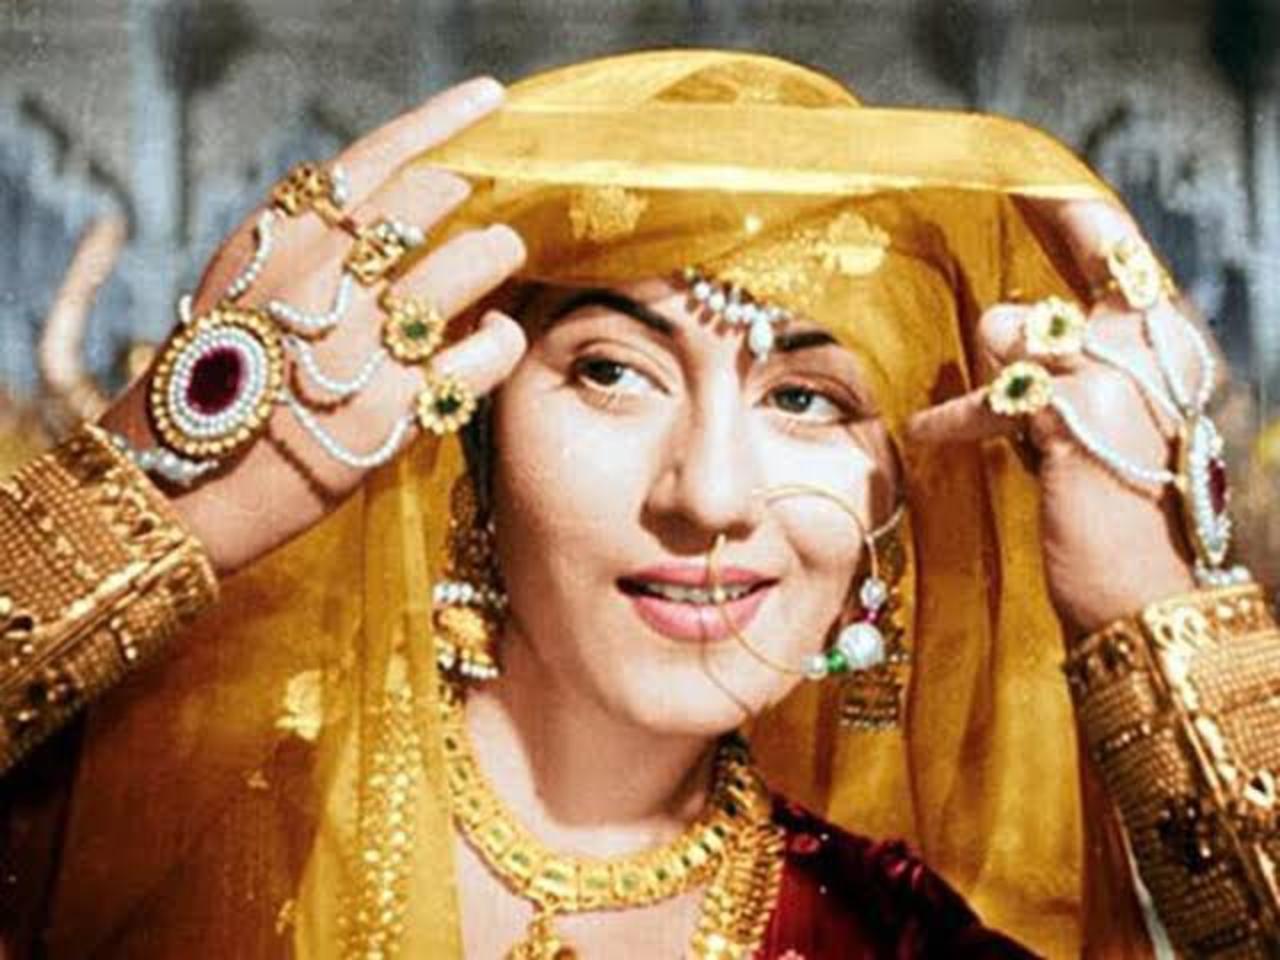 At the age of 9, Madhubala entered the Hindi film industry. In 1942, Madhubala featured in the film 'Basant'. She worked as a child artist in films like 'Basant', 'Dhanna Bhagat', 'Poojari', 'Phoolwari', and 'Rajputani'.